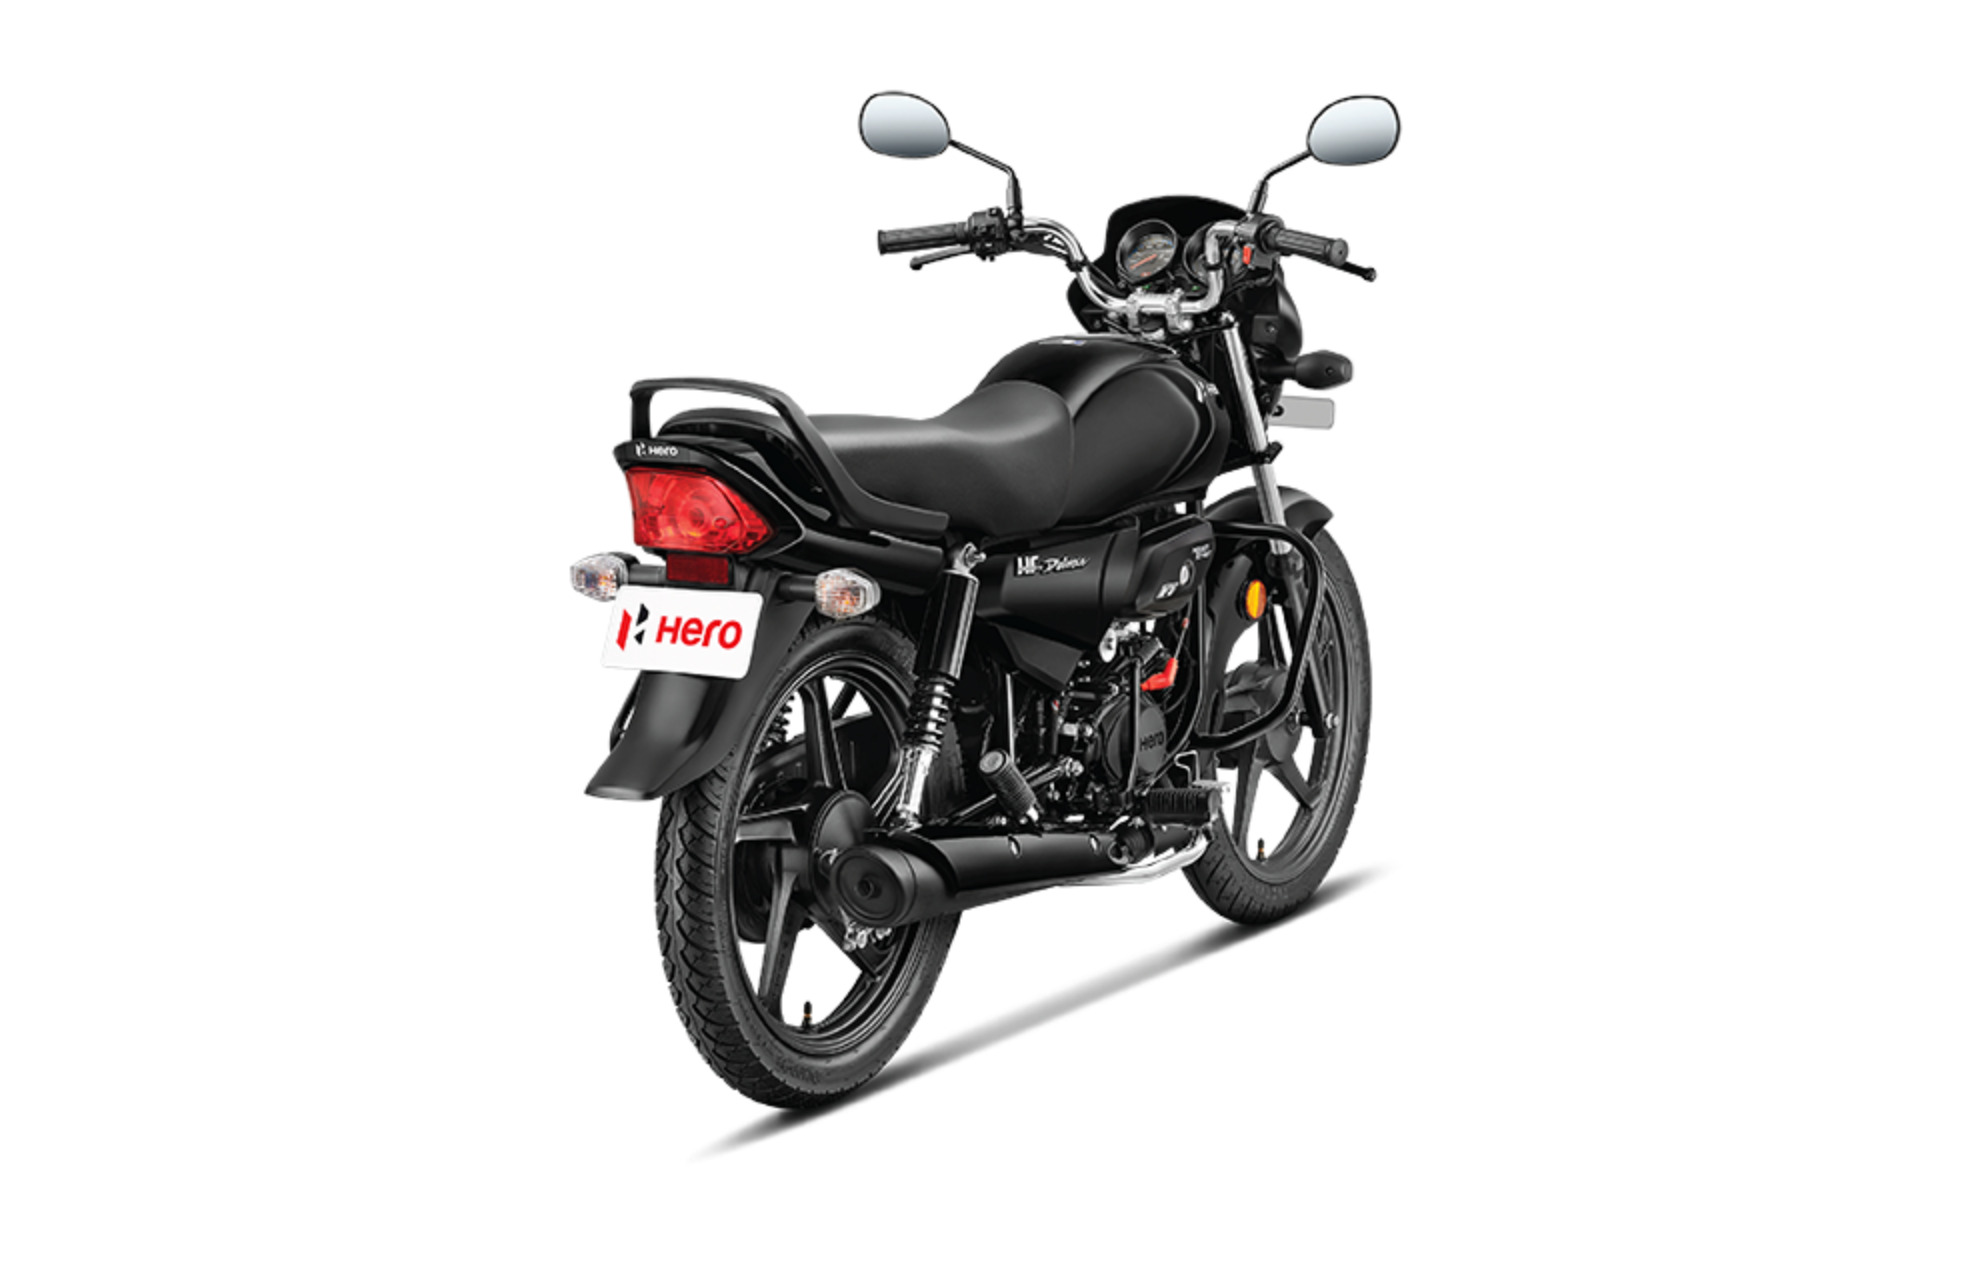 New All-Black Hero HF Deluxe Launched in India at Rs 60,760 - angle